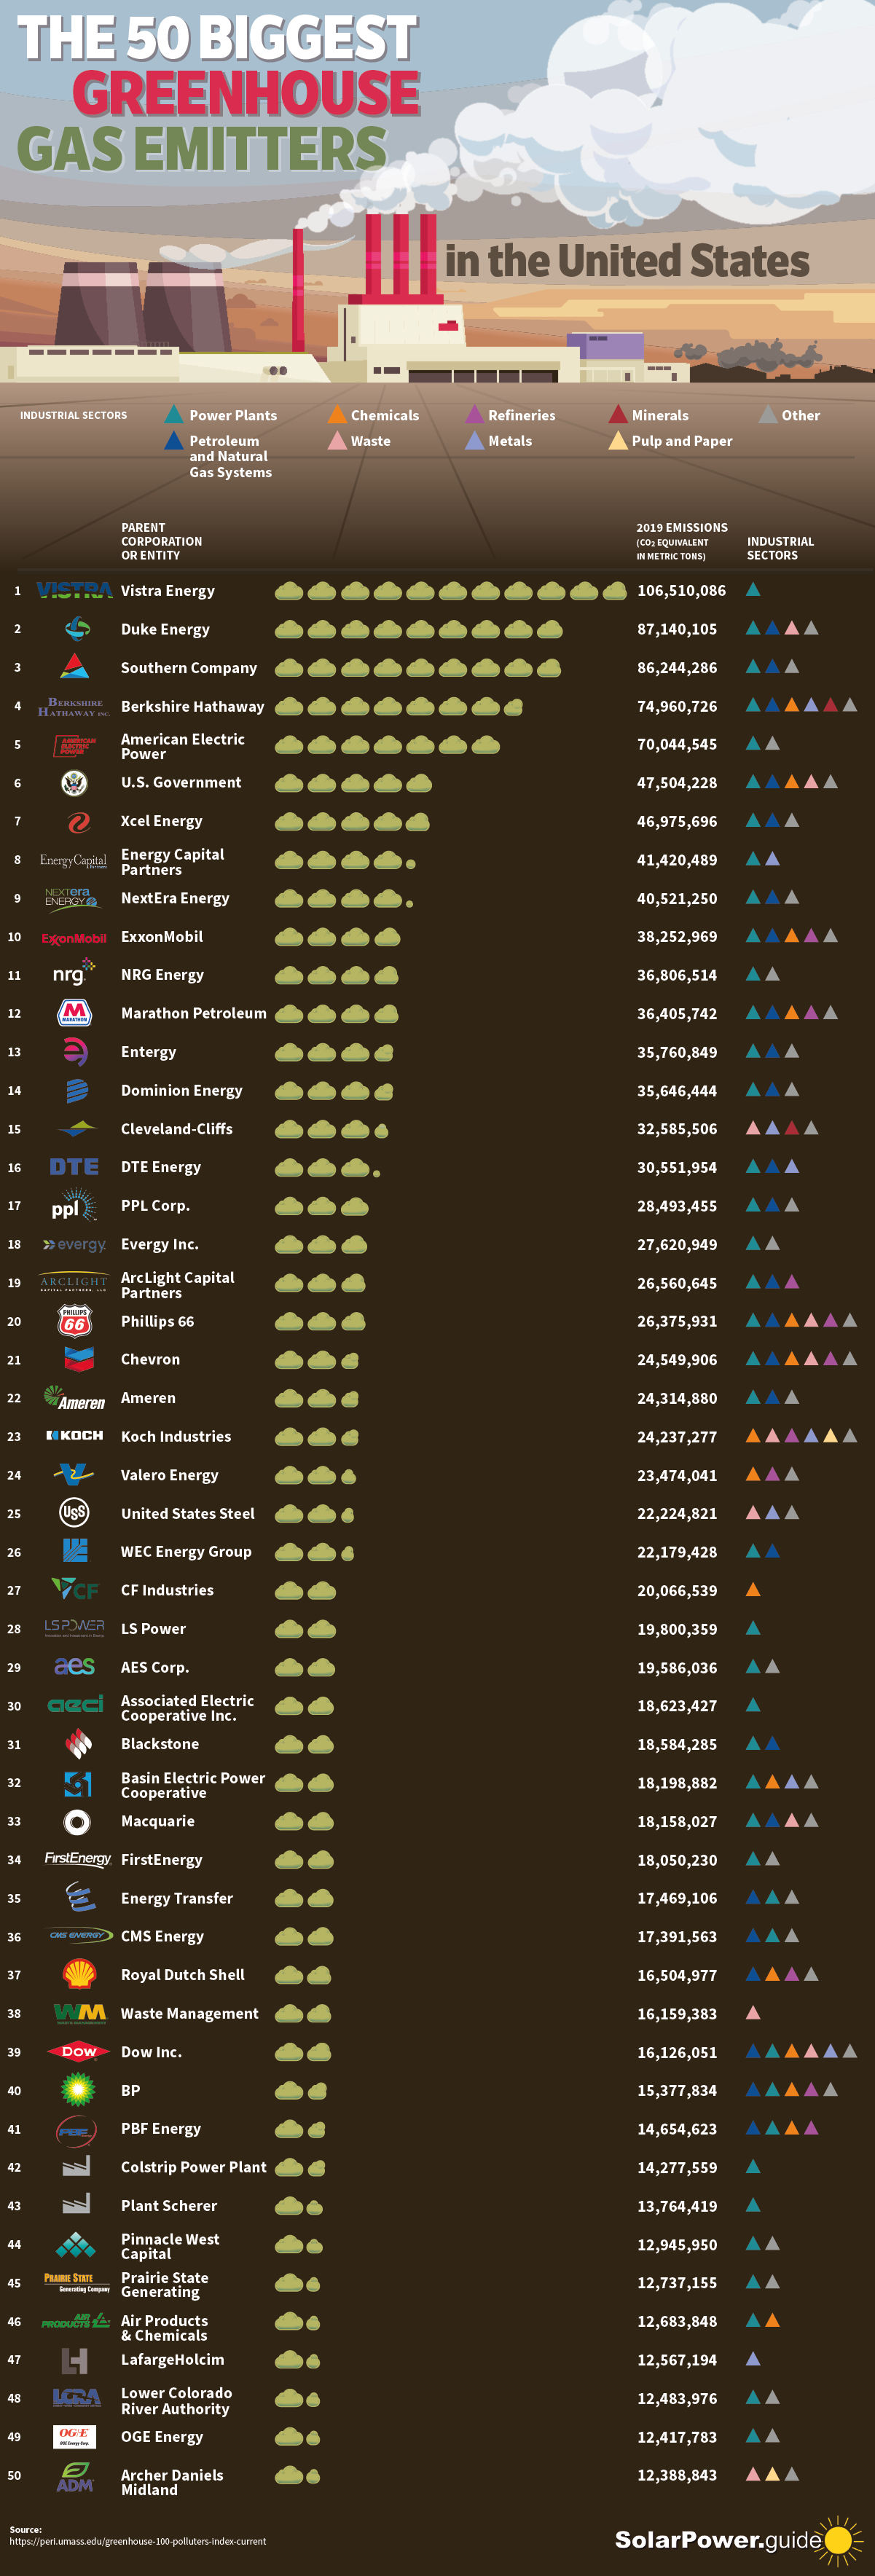 The 50 Biggest Greenhouse Gas Emitters in the United States - Solar Power Guide Solar Energy Insights - Infographic